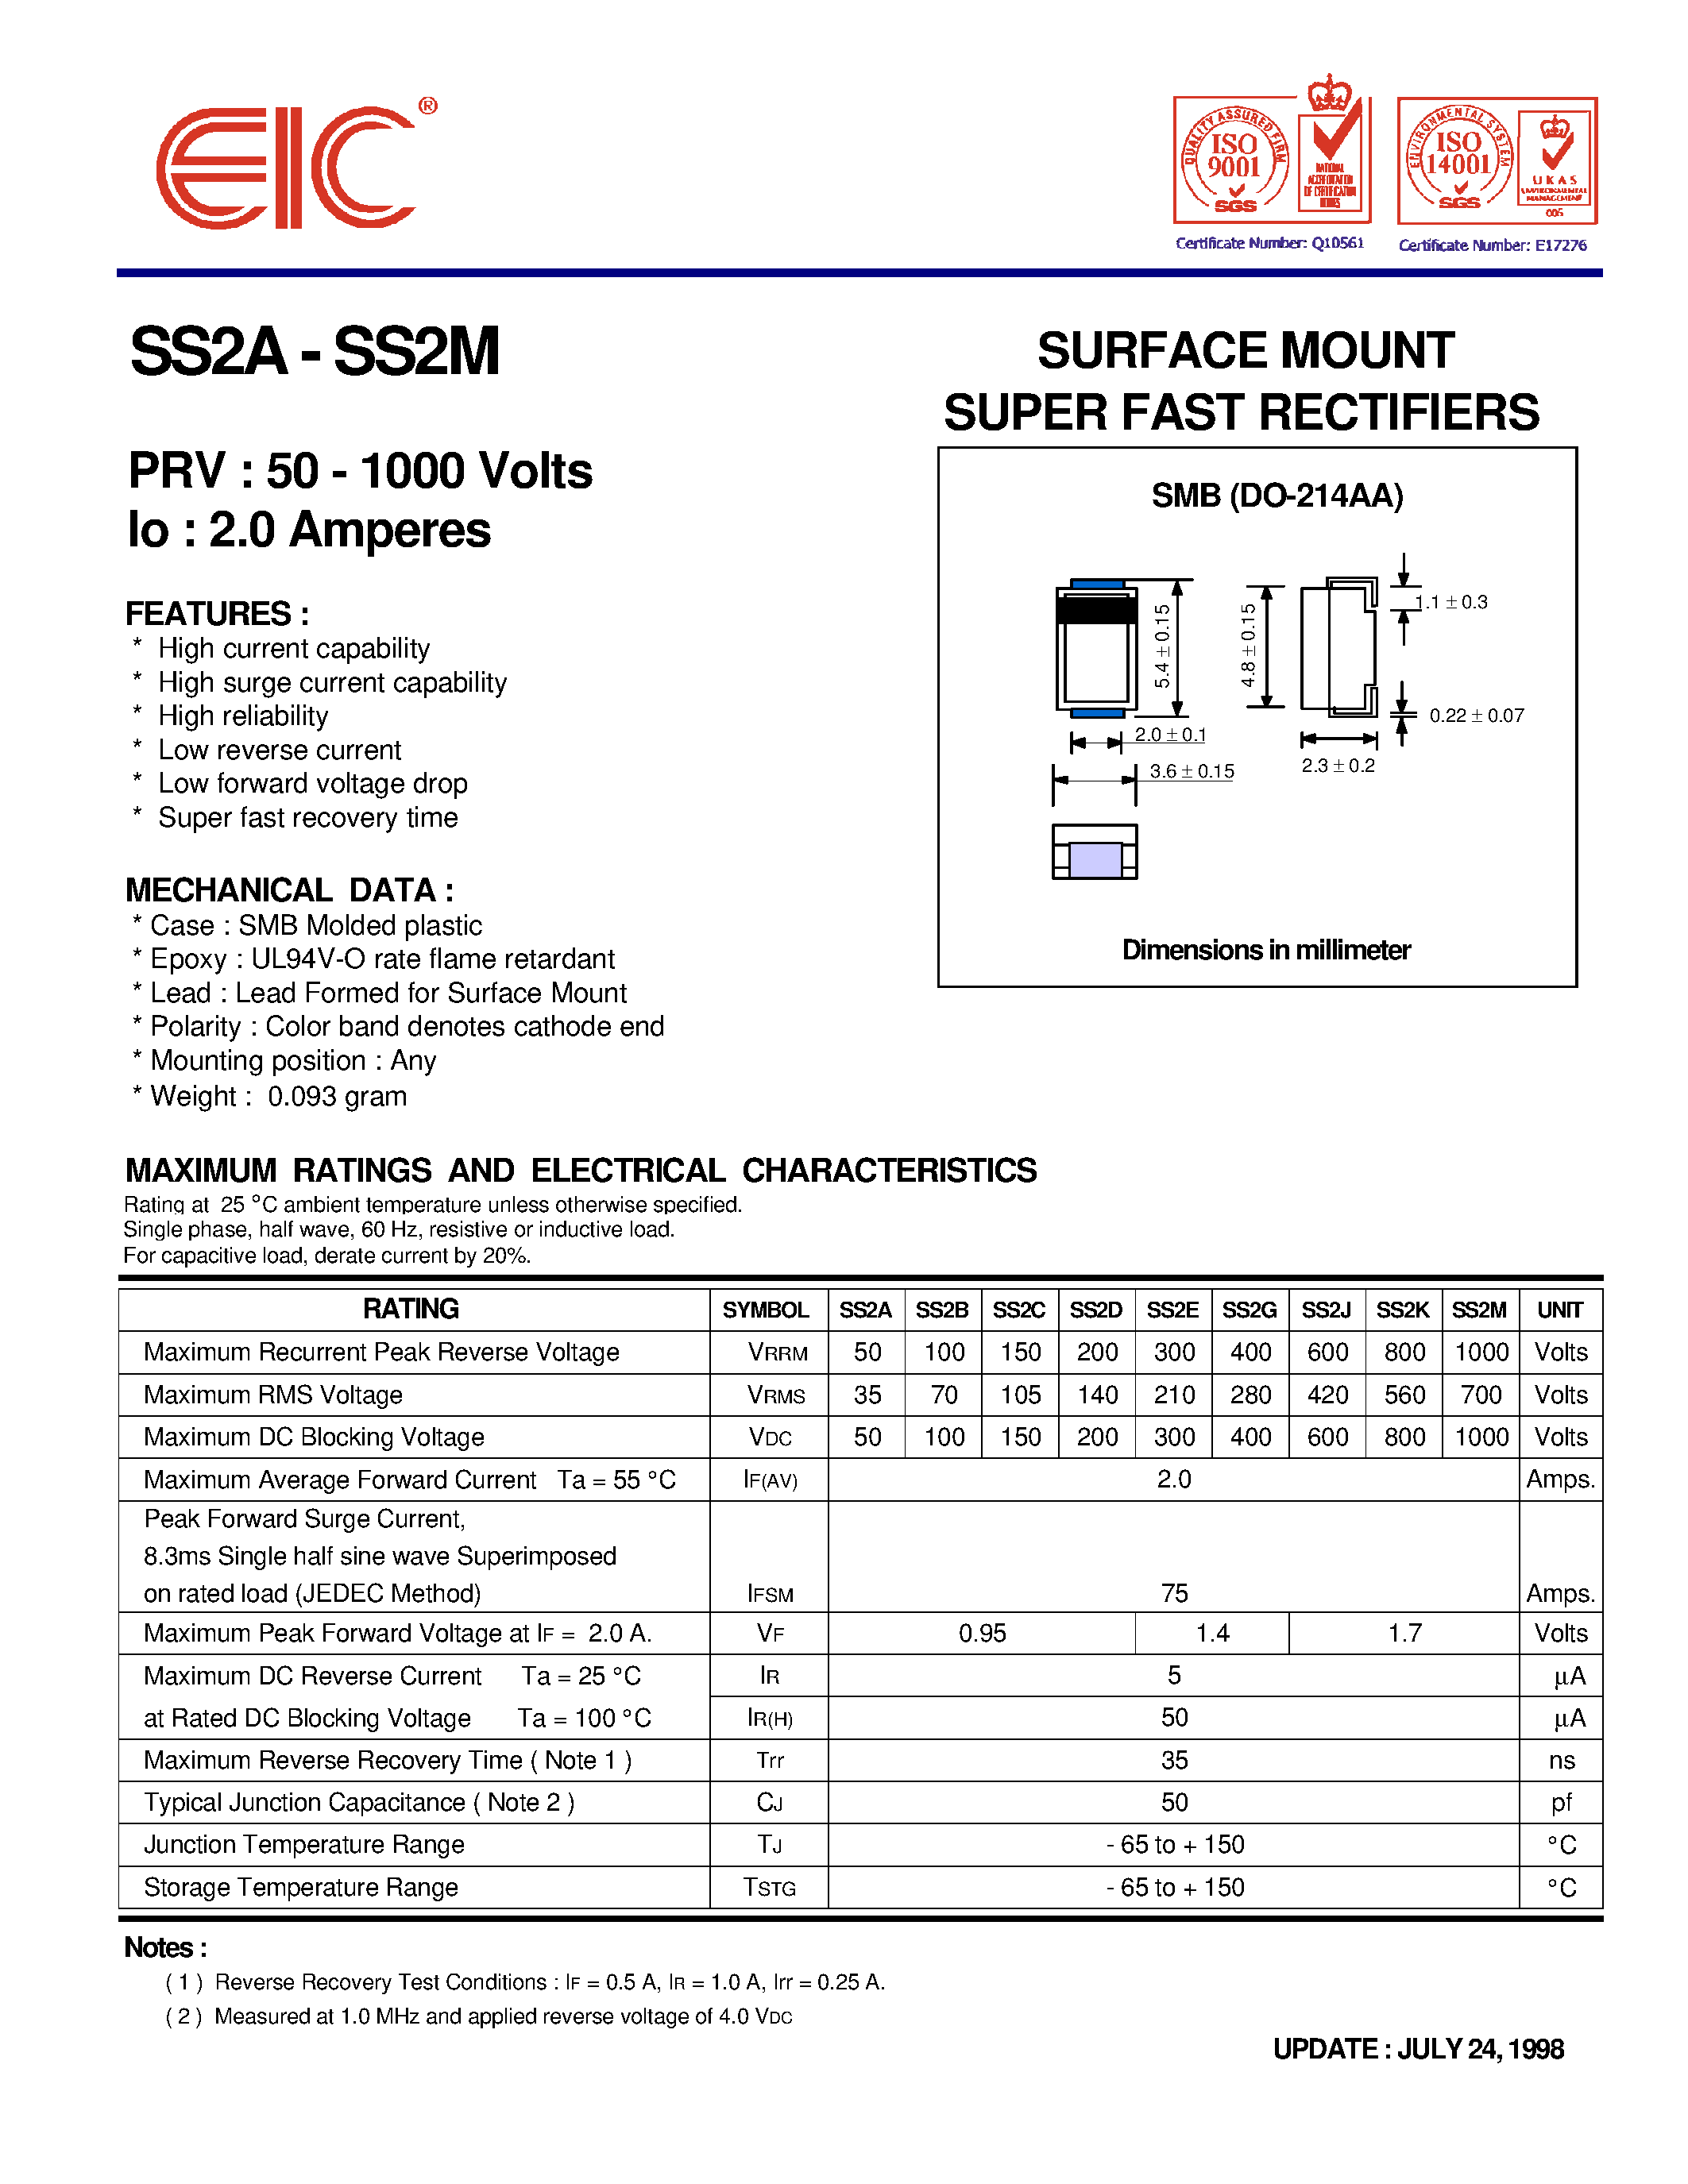 Даташит SS2B - SURFACE MOUNT SUPER FAST RECTIFIERS страница 1